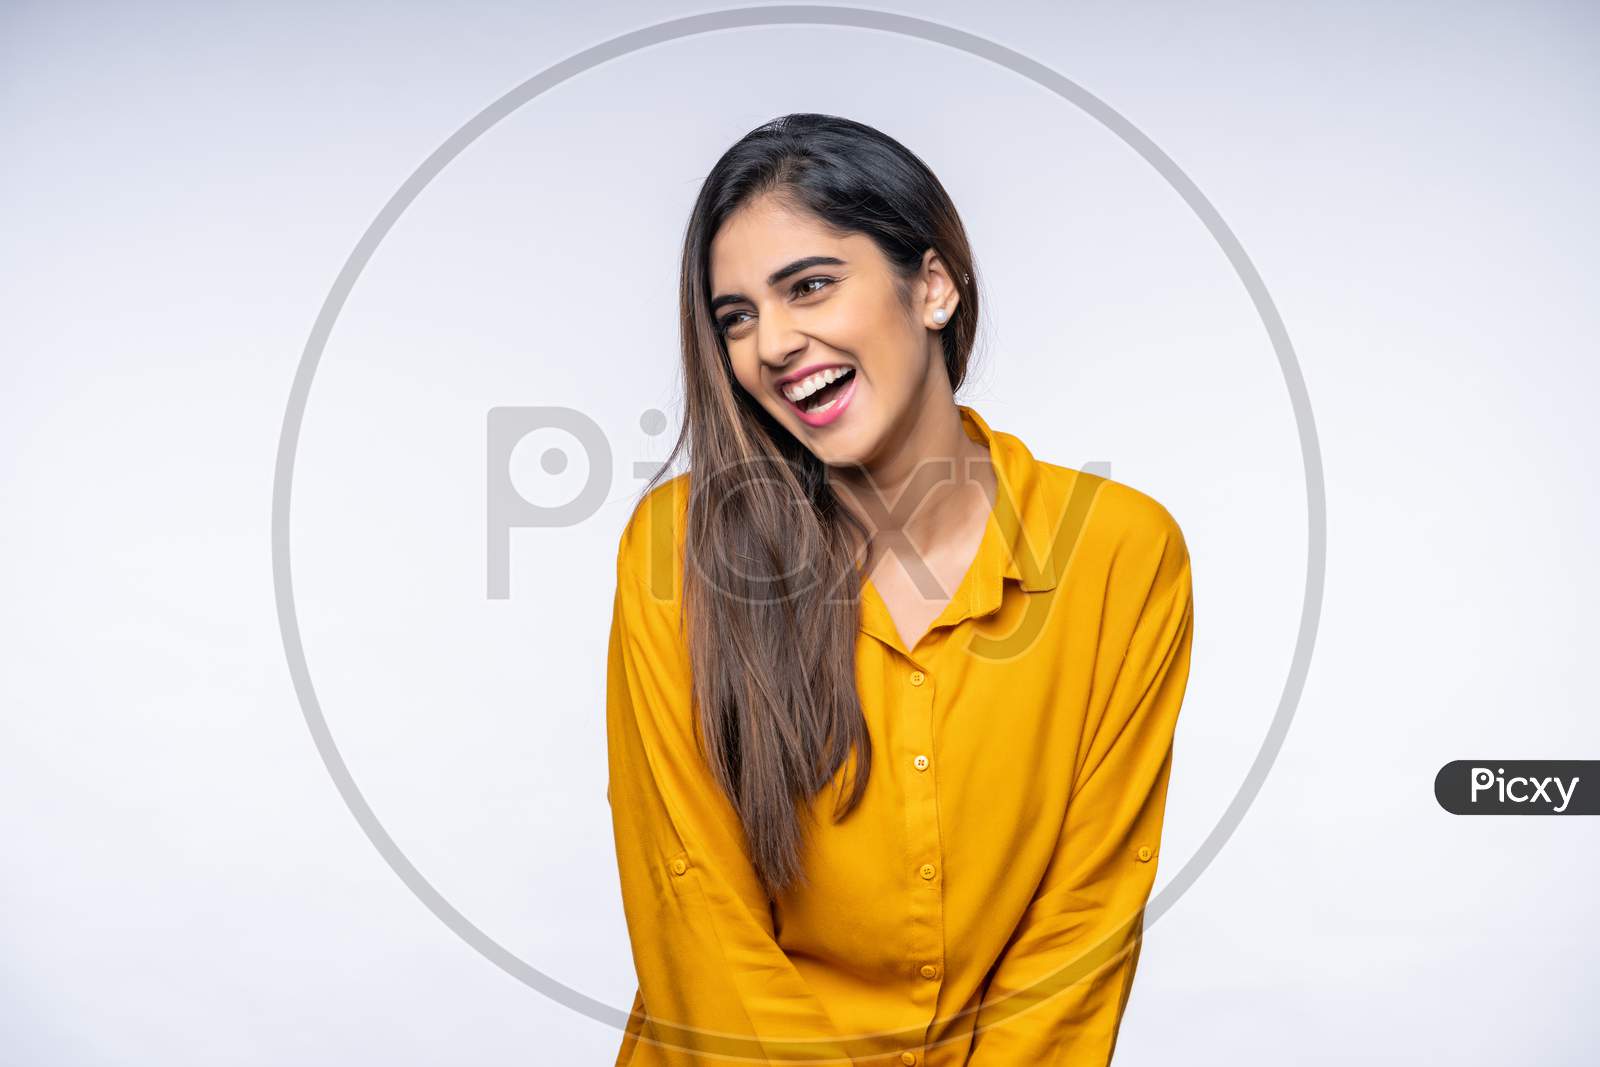 Indian confident young woman smiling